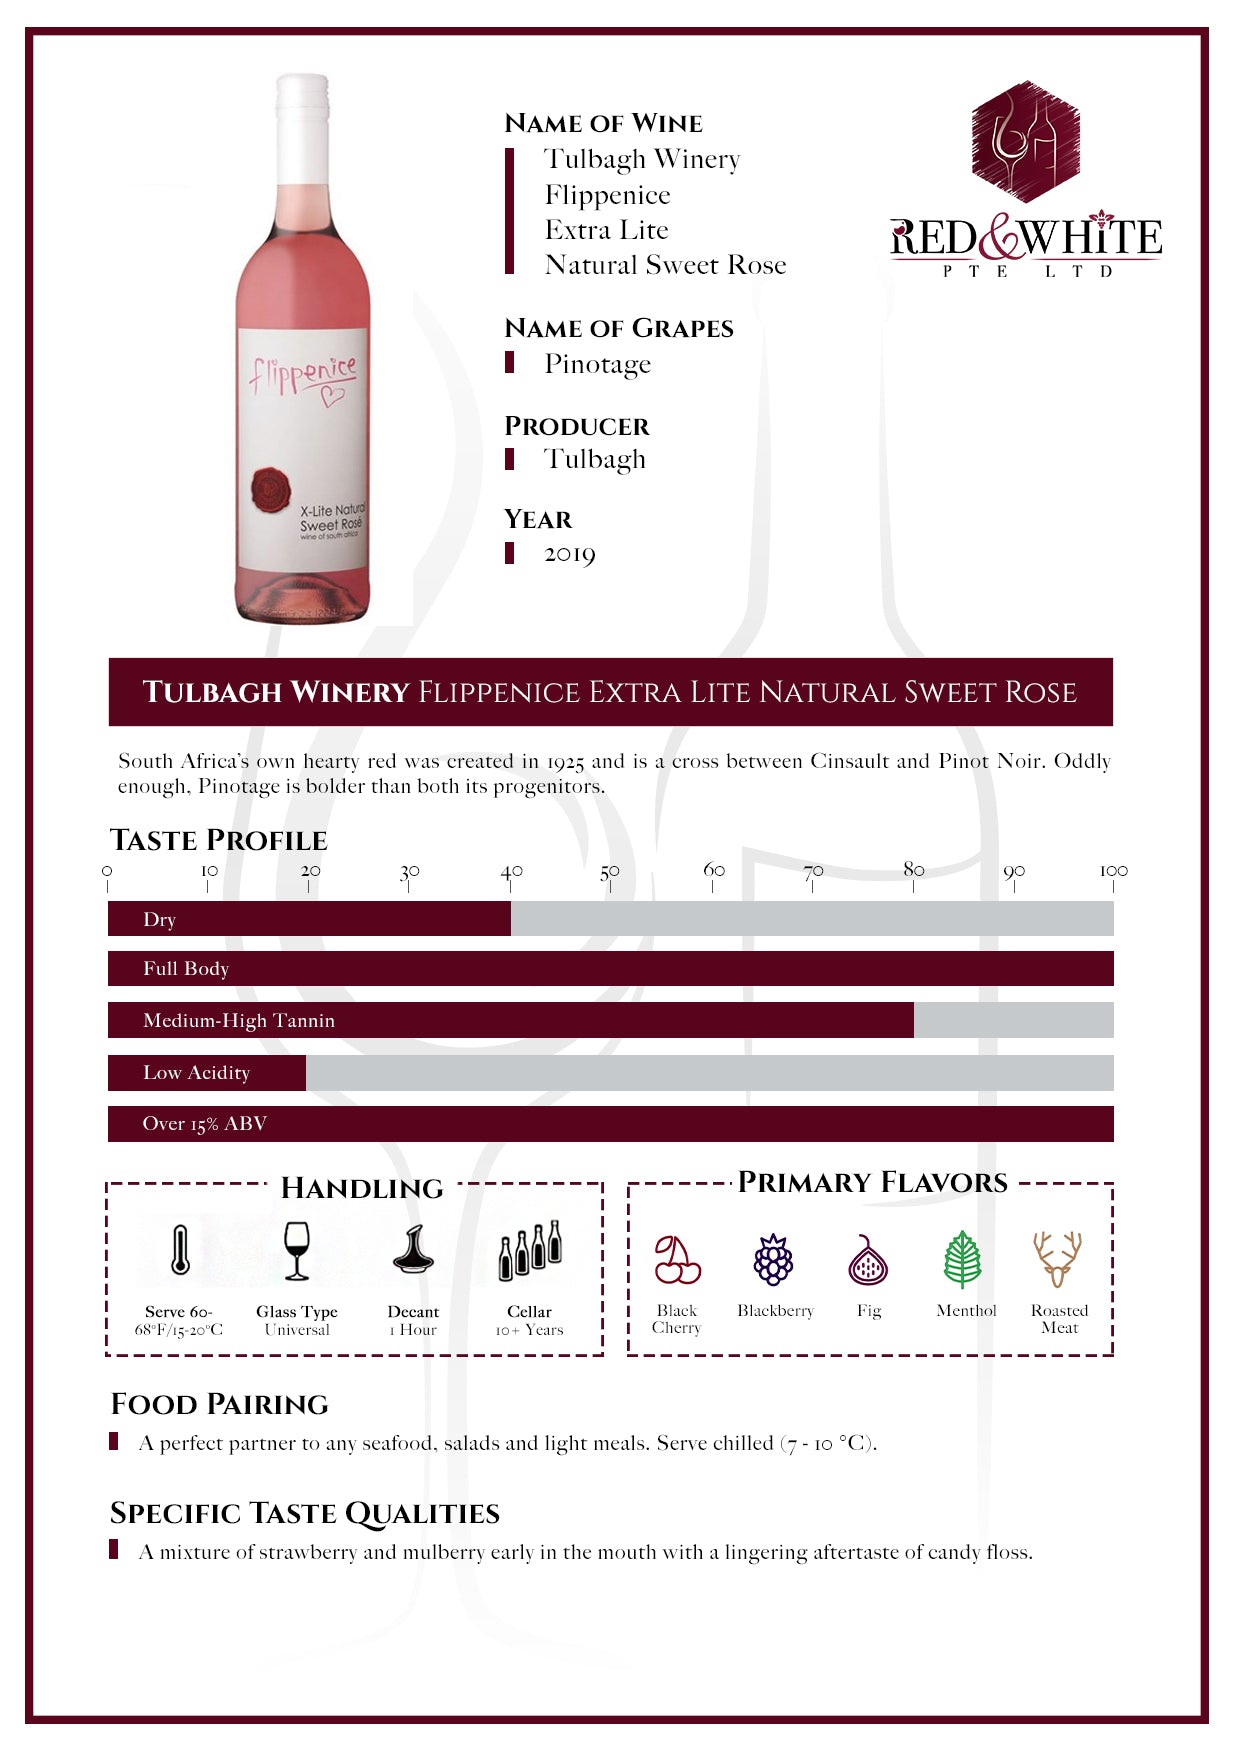 Tulbagh Winery Flippenice Xtra Lite Natural Sweet Rose 2019